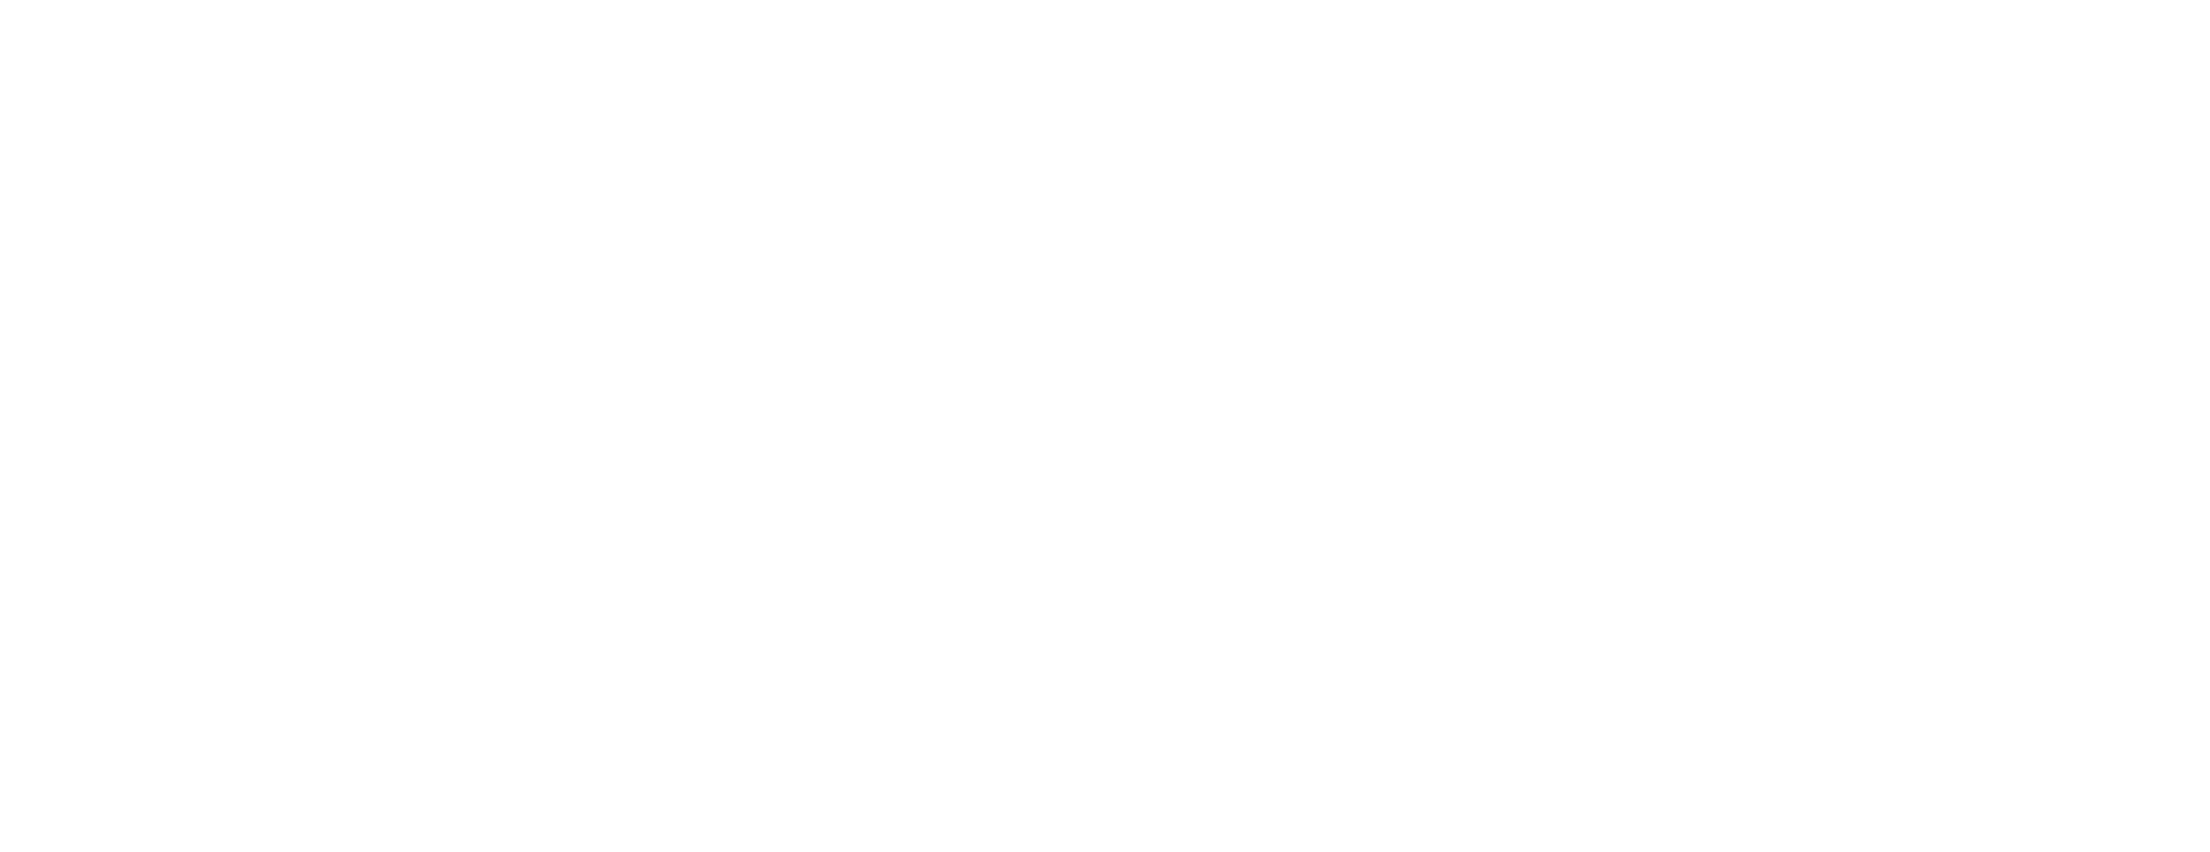 The OpShop